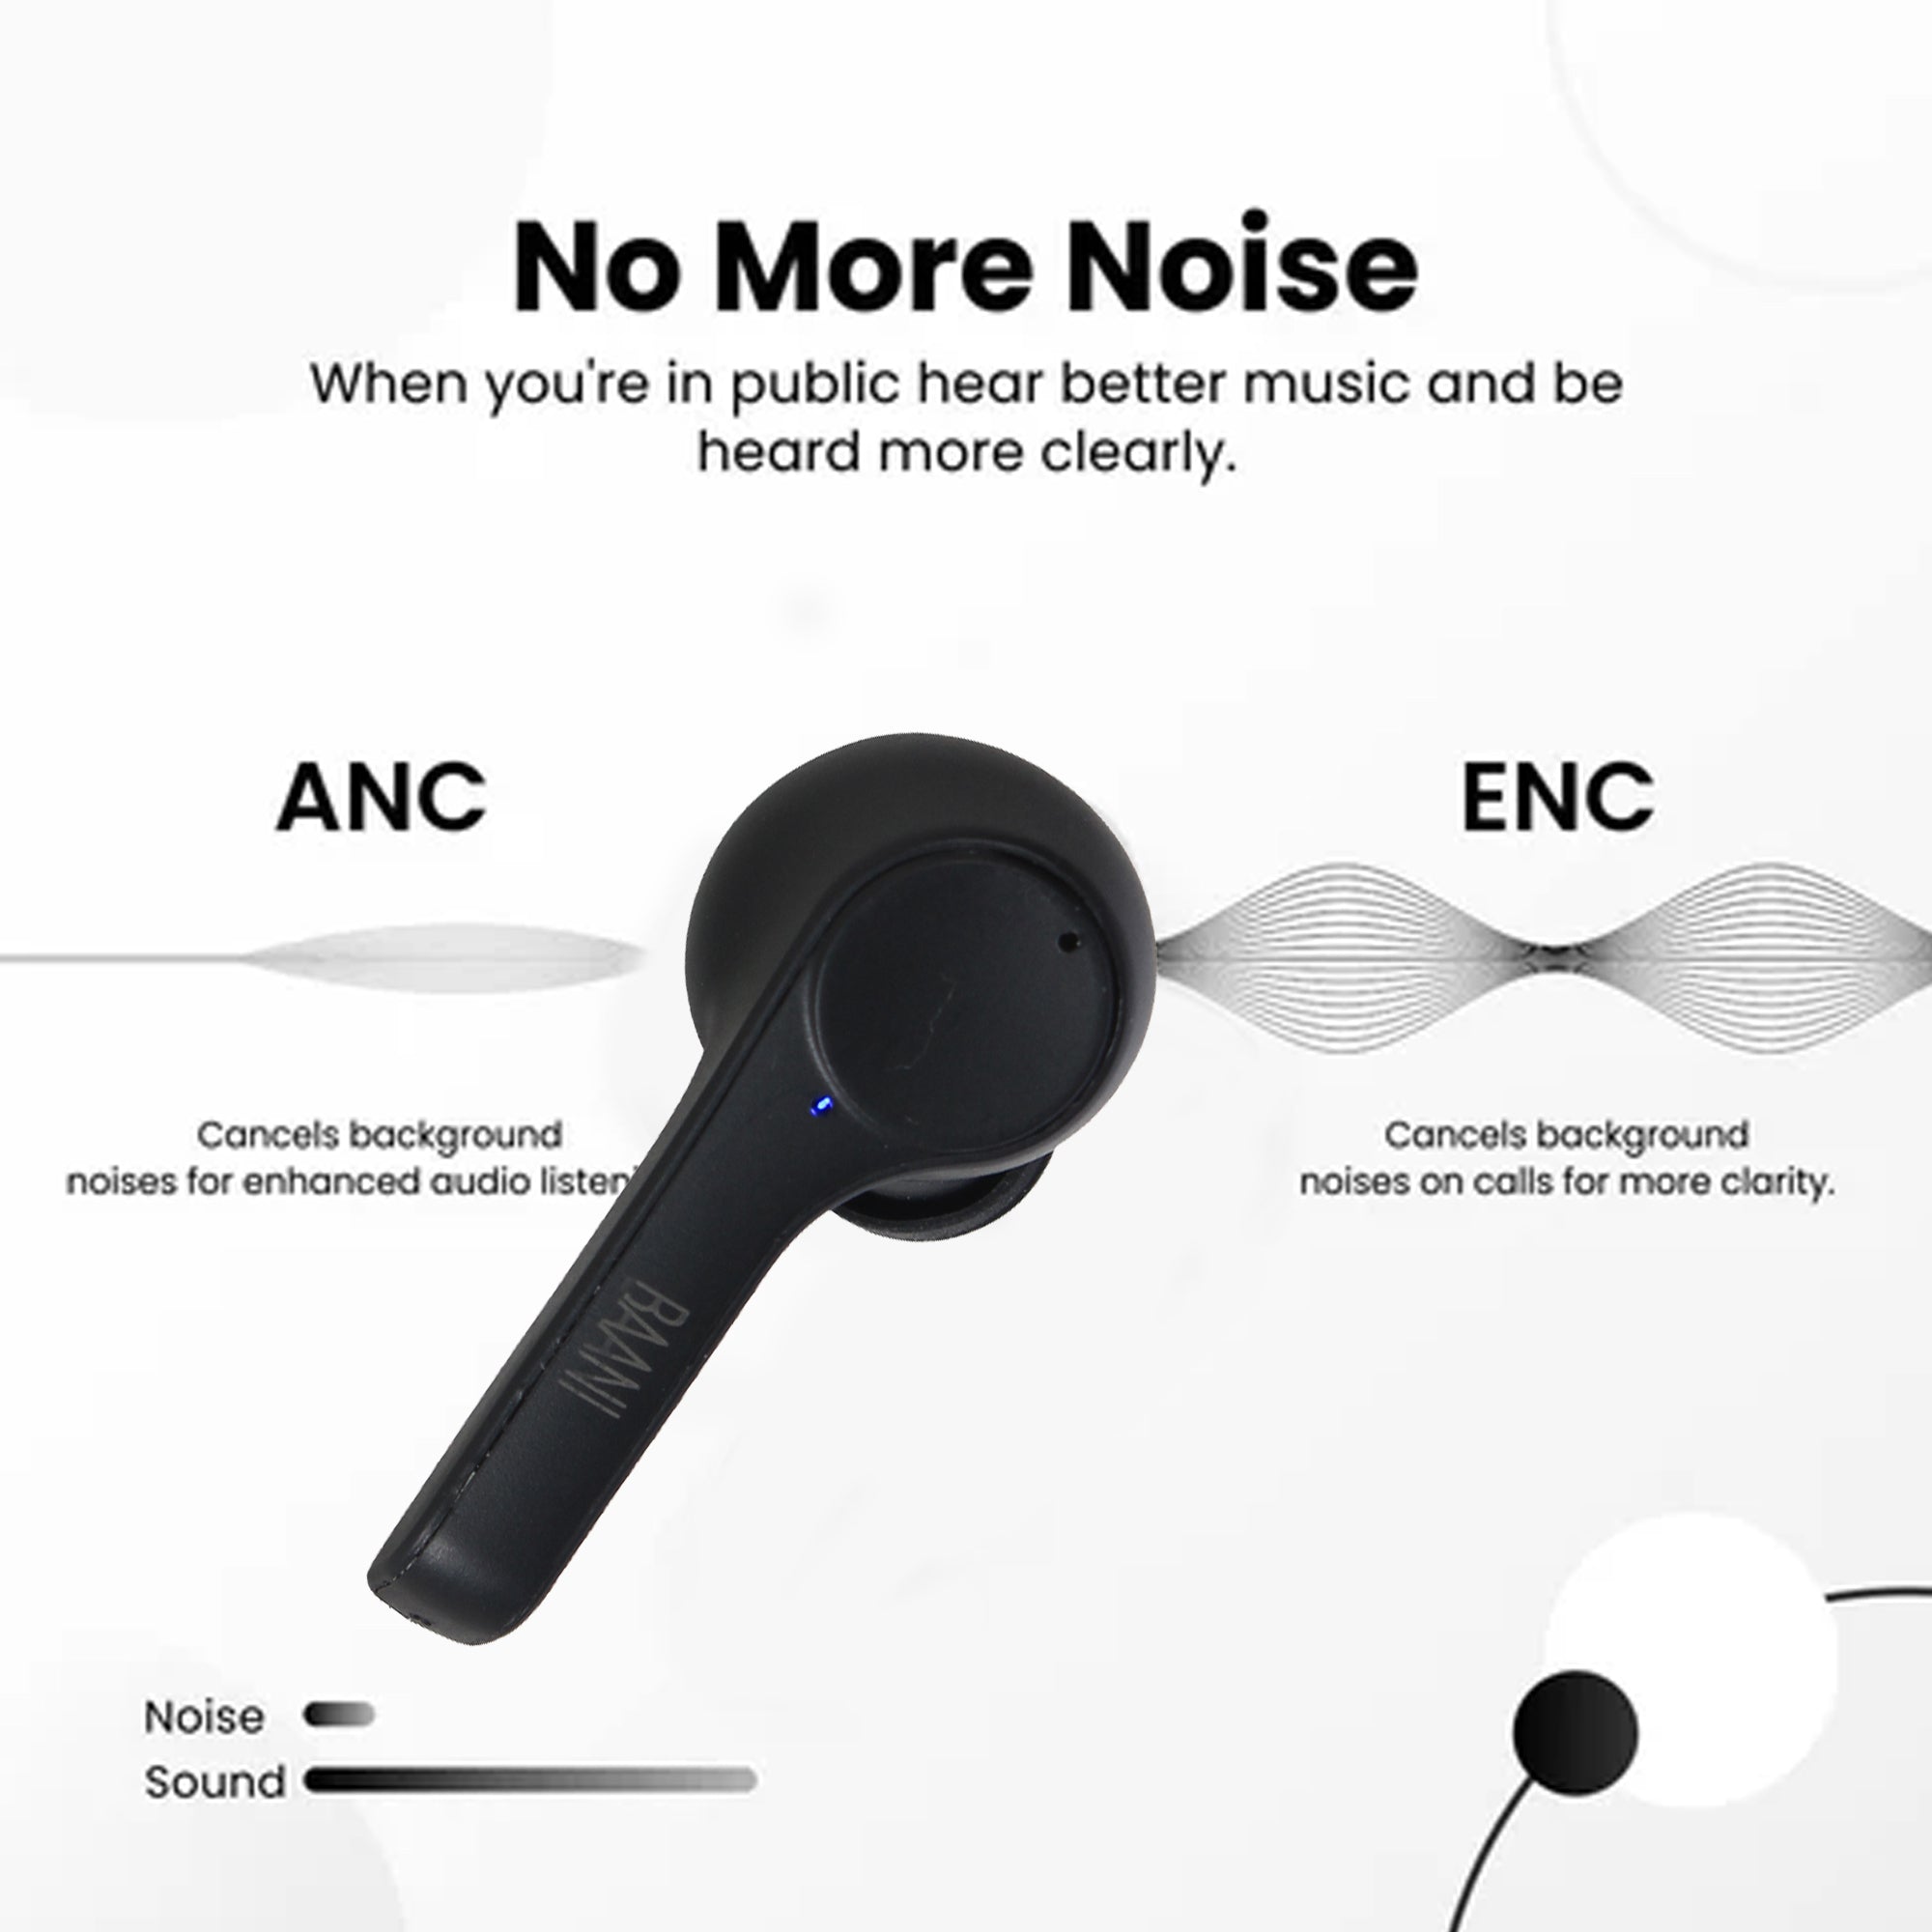 Noise cancellation feature of BN 201 